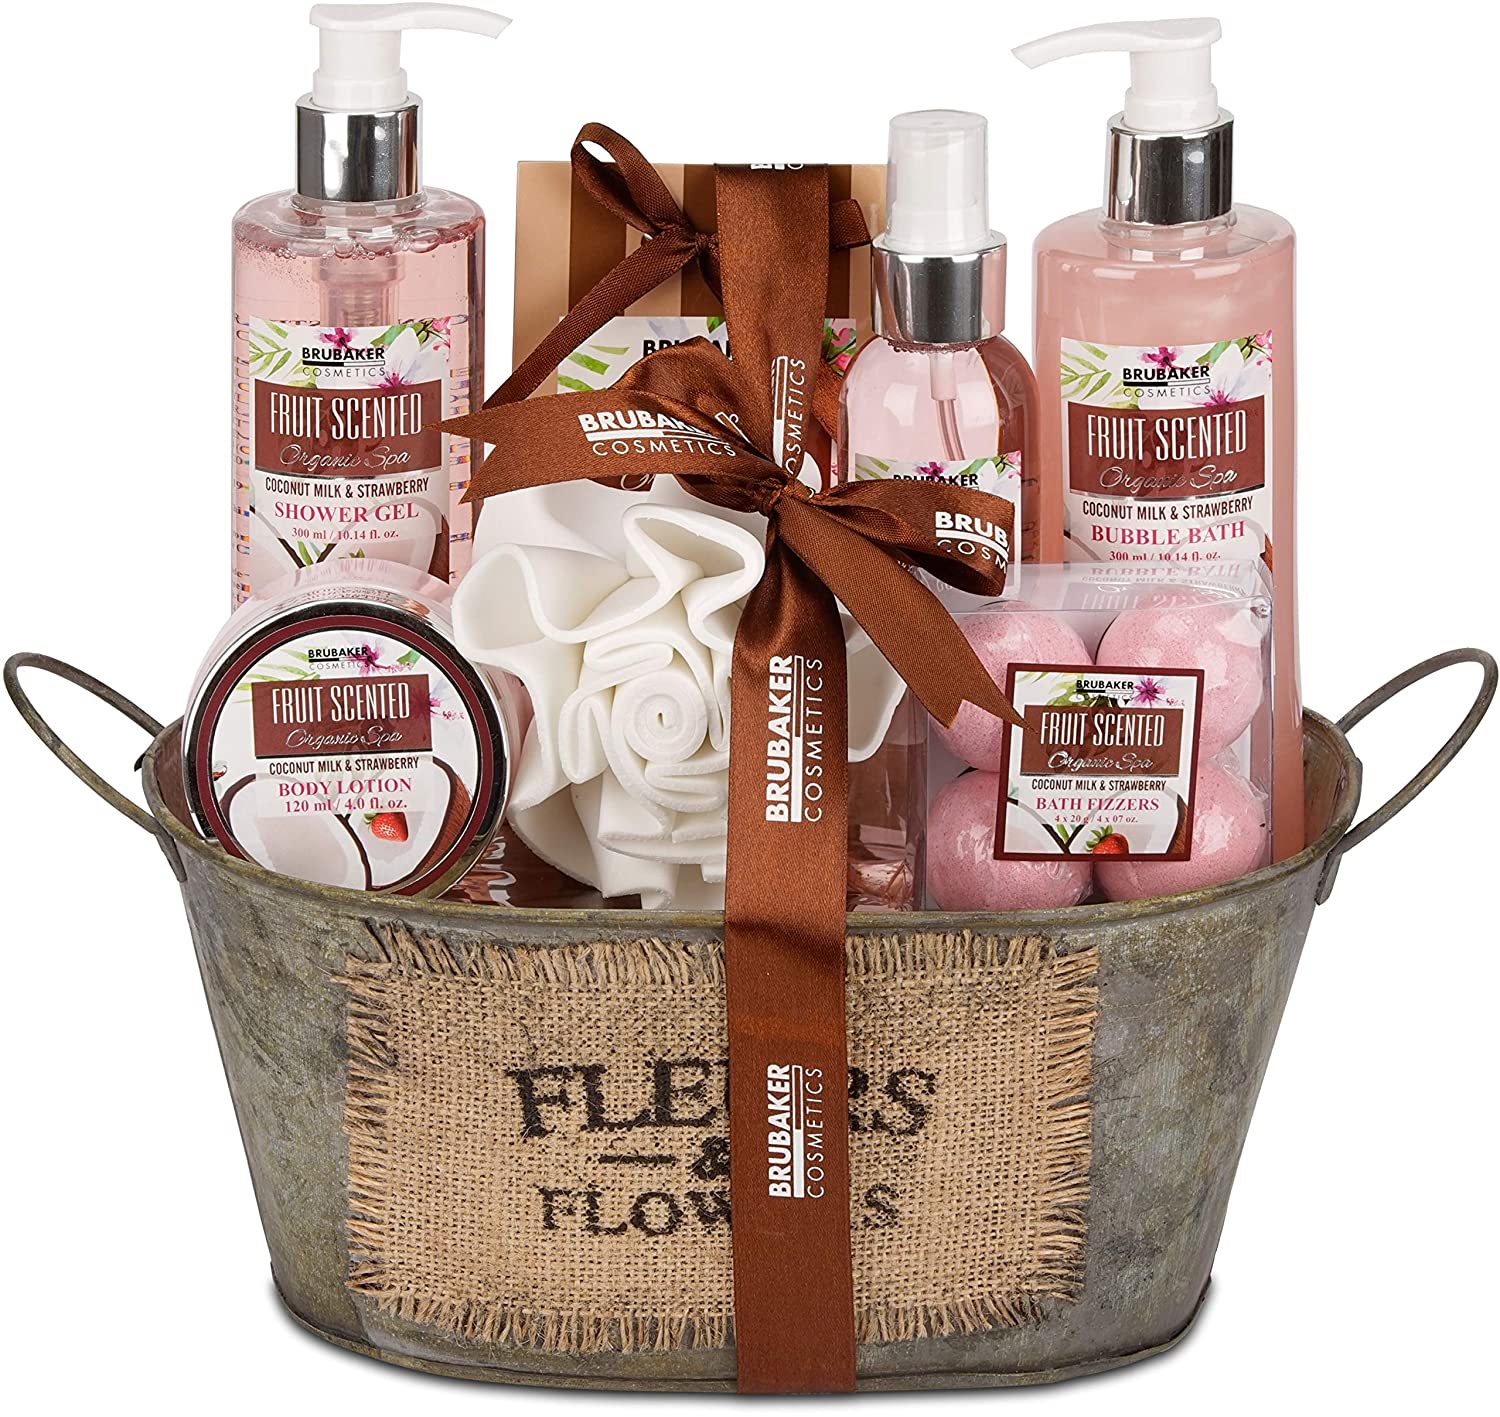 Brubaker Cosmetics Bath and Shower Set Coconut and Strawberry Fragrance 10 Piece Gift Set in Vintage Tub, ‎pink